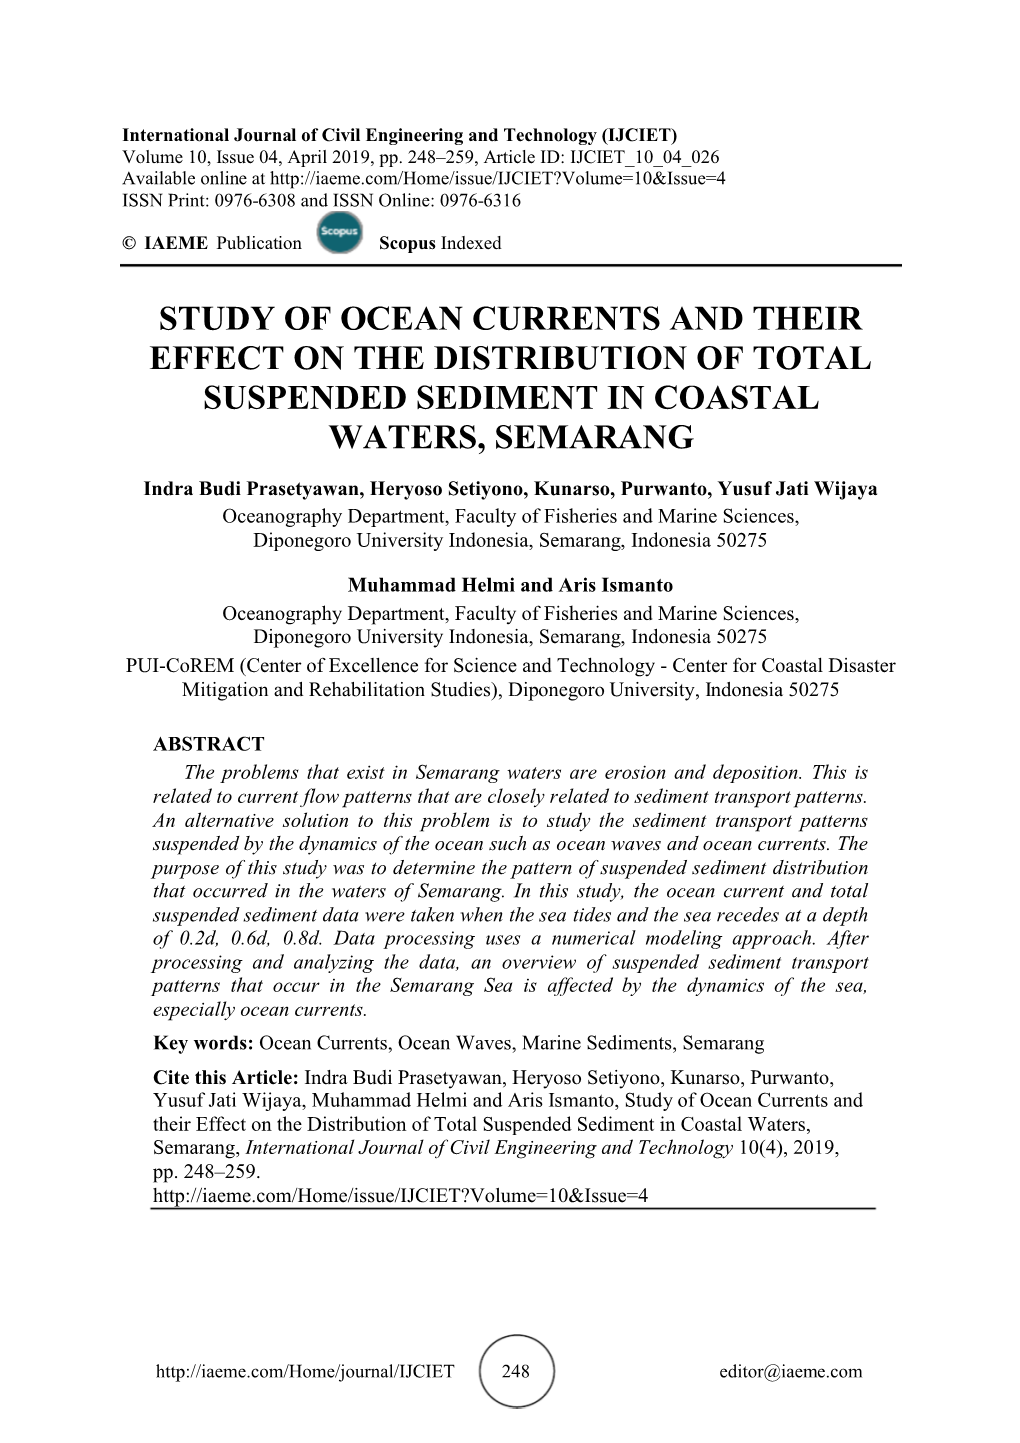 Study of Ocean Currents and Their Effect on the Distribution of Total Suspended Sediment in Coastal Waters, Semarang